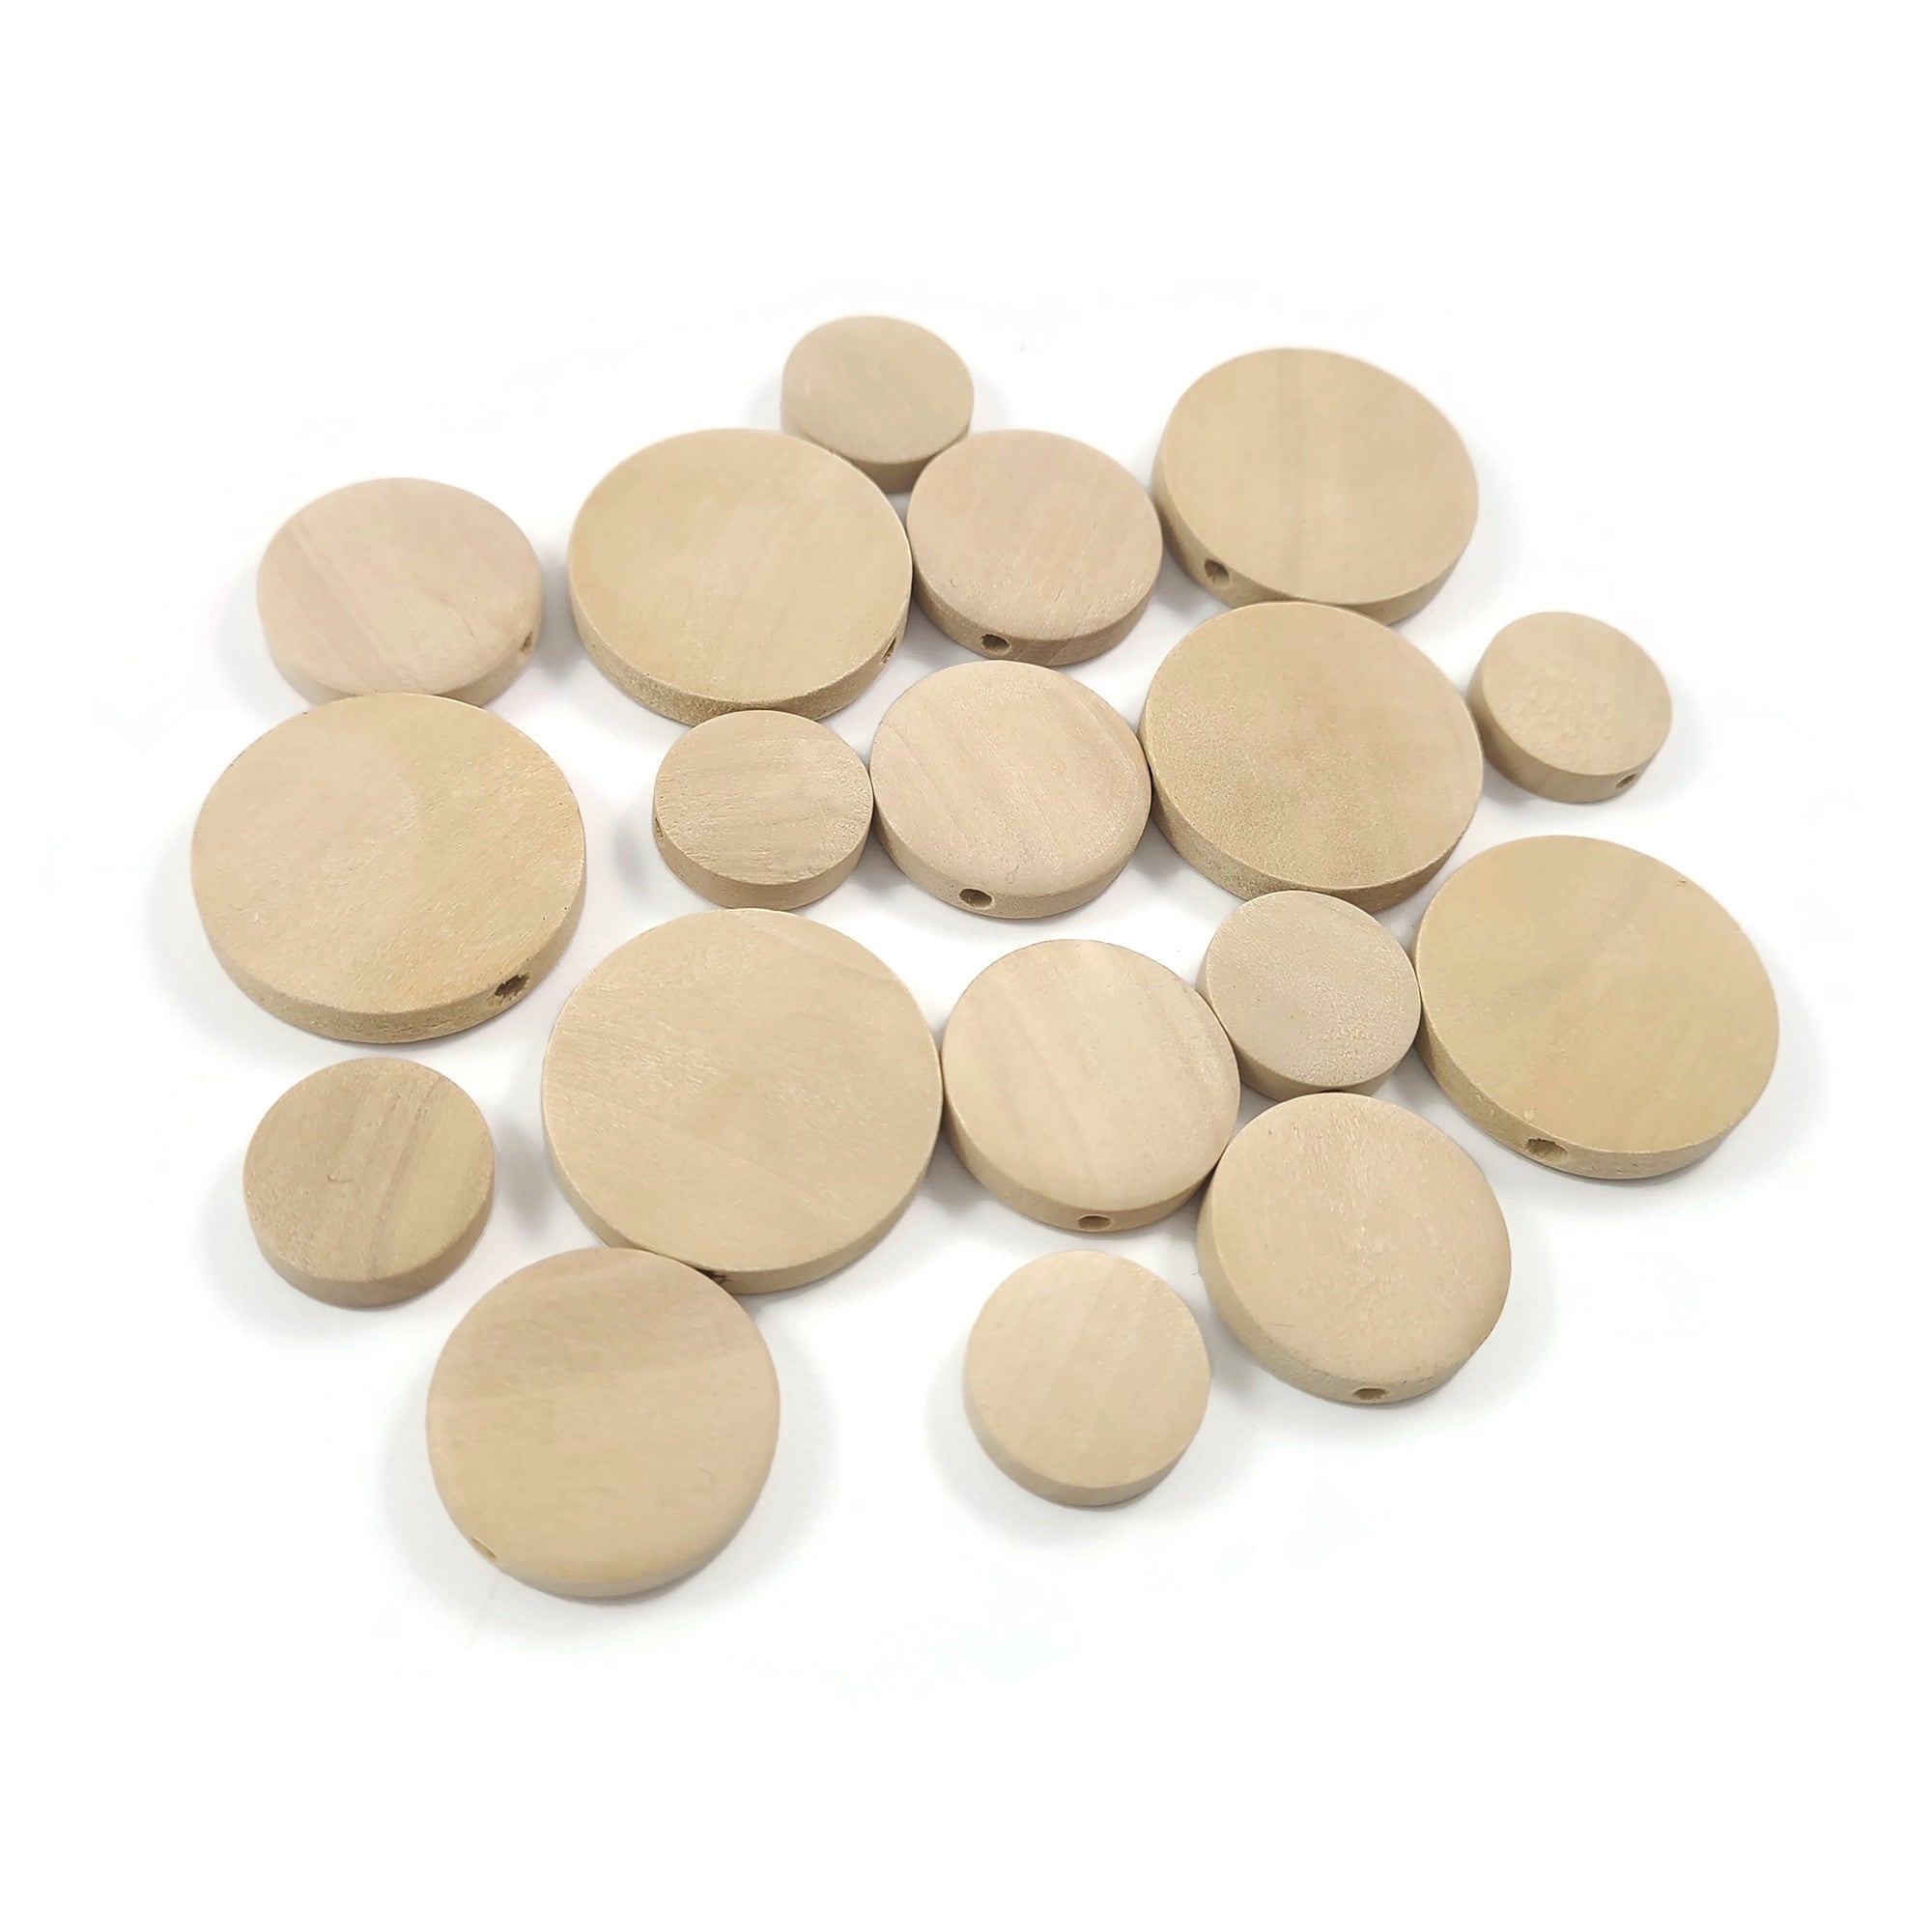 Unfinished Wood Circles for Crafts 12 Inch Diameter Made from